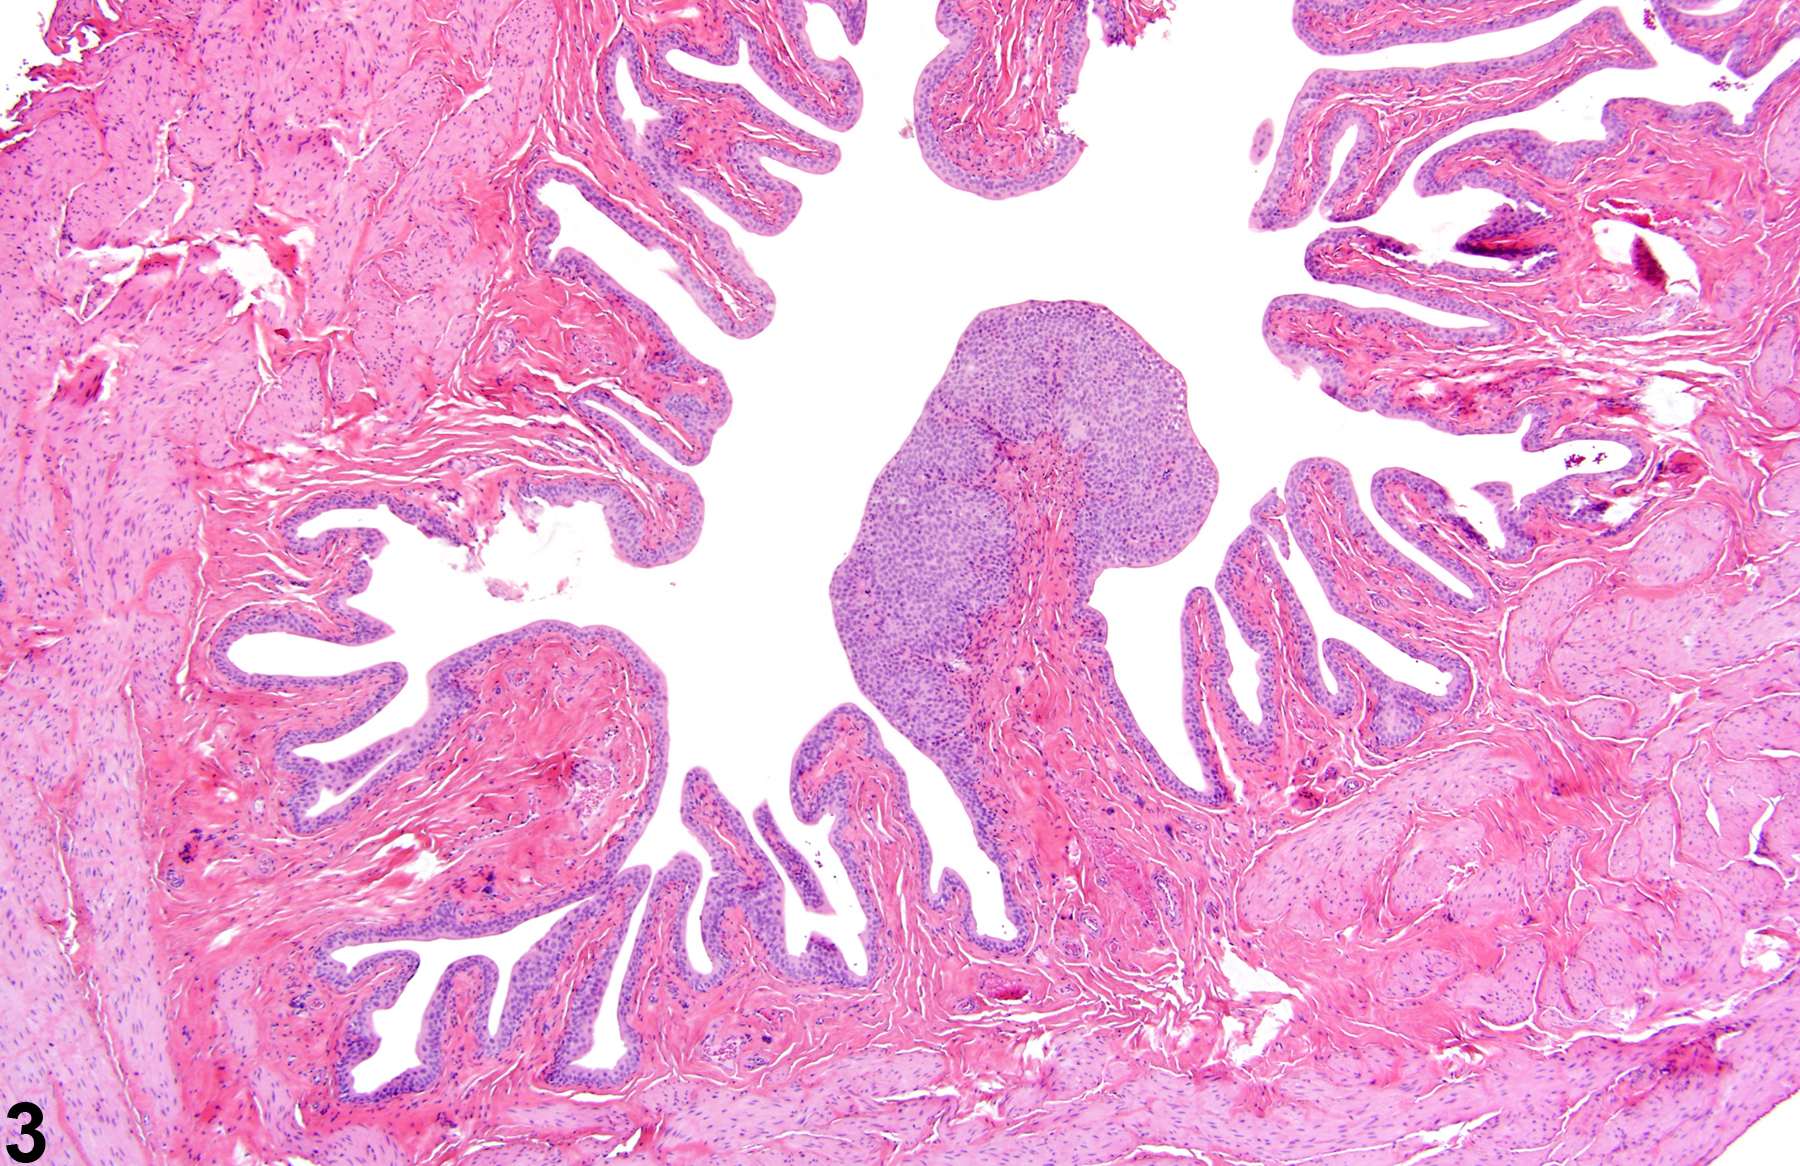 Image of hyperplasia in the urinary bladder from a male F344/N rat in a chronic study